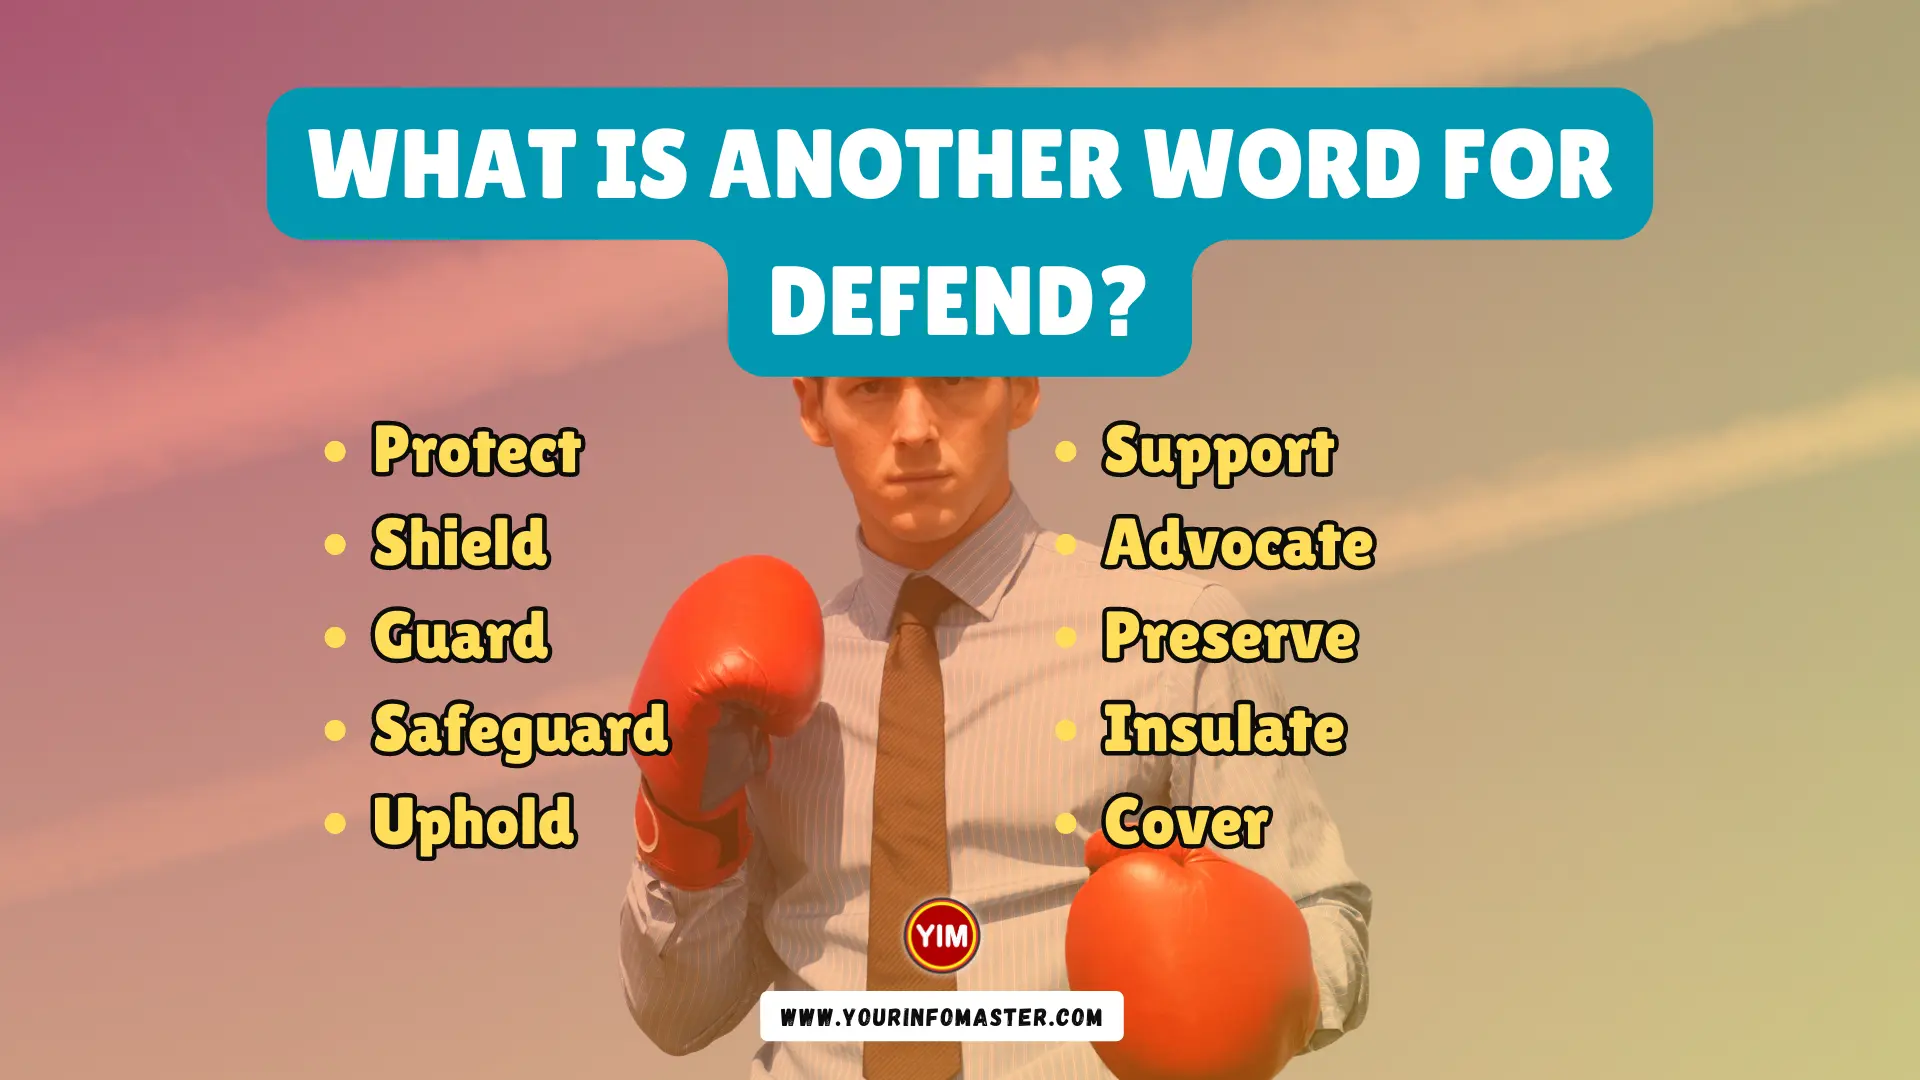 What is another word for Defend